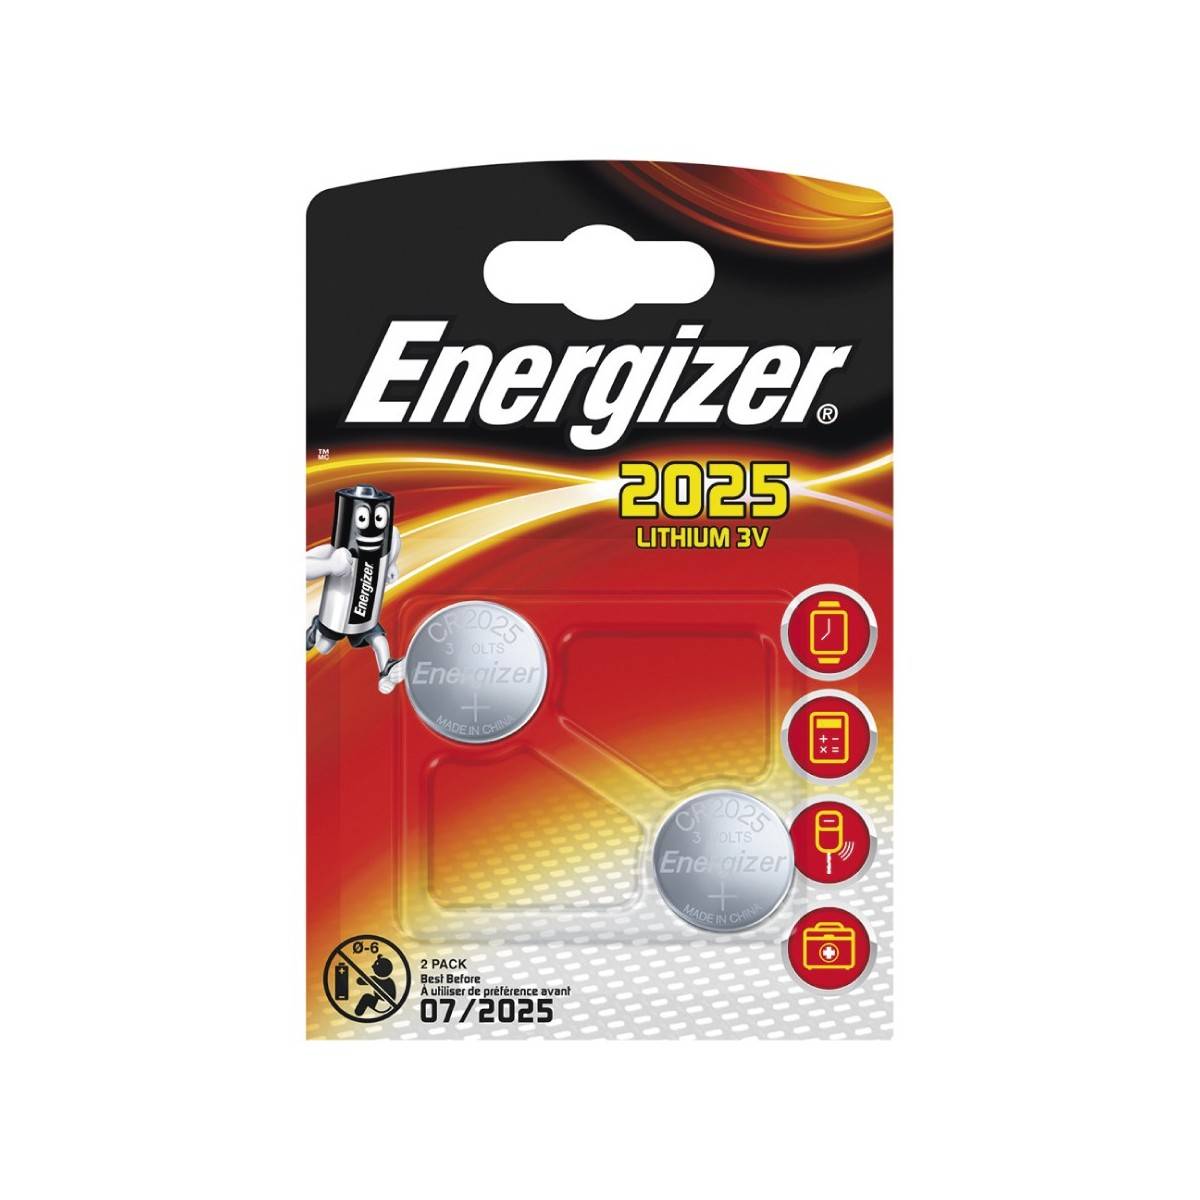 Energizer CR2025 Lithium Performance Battery, Blister of 2 pcs.